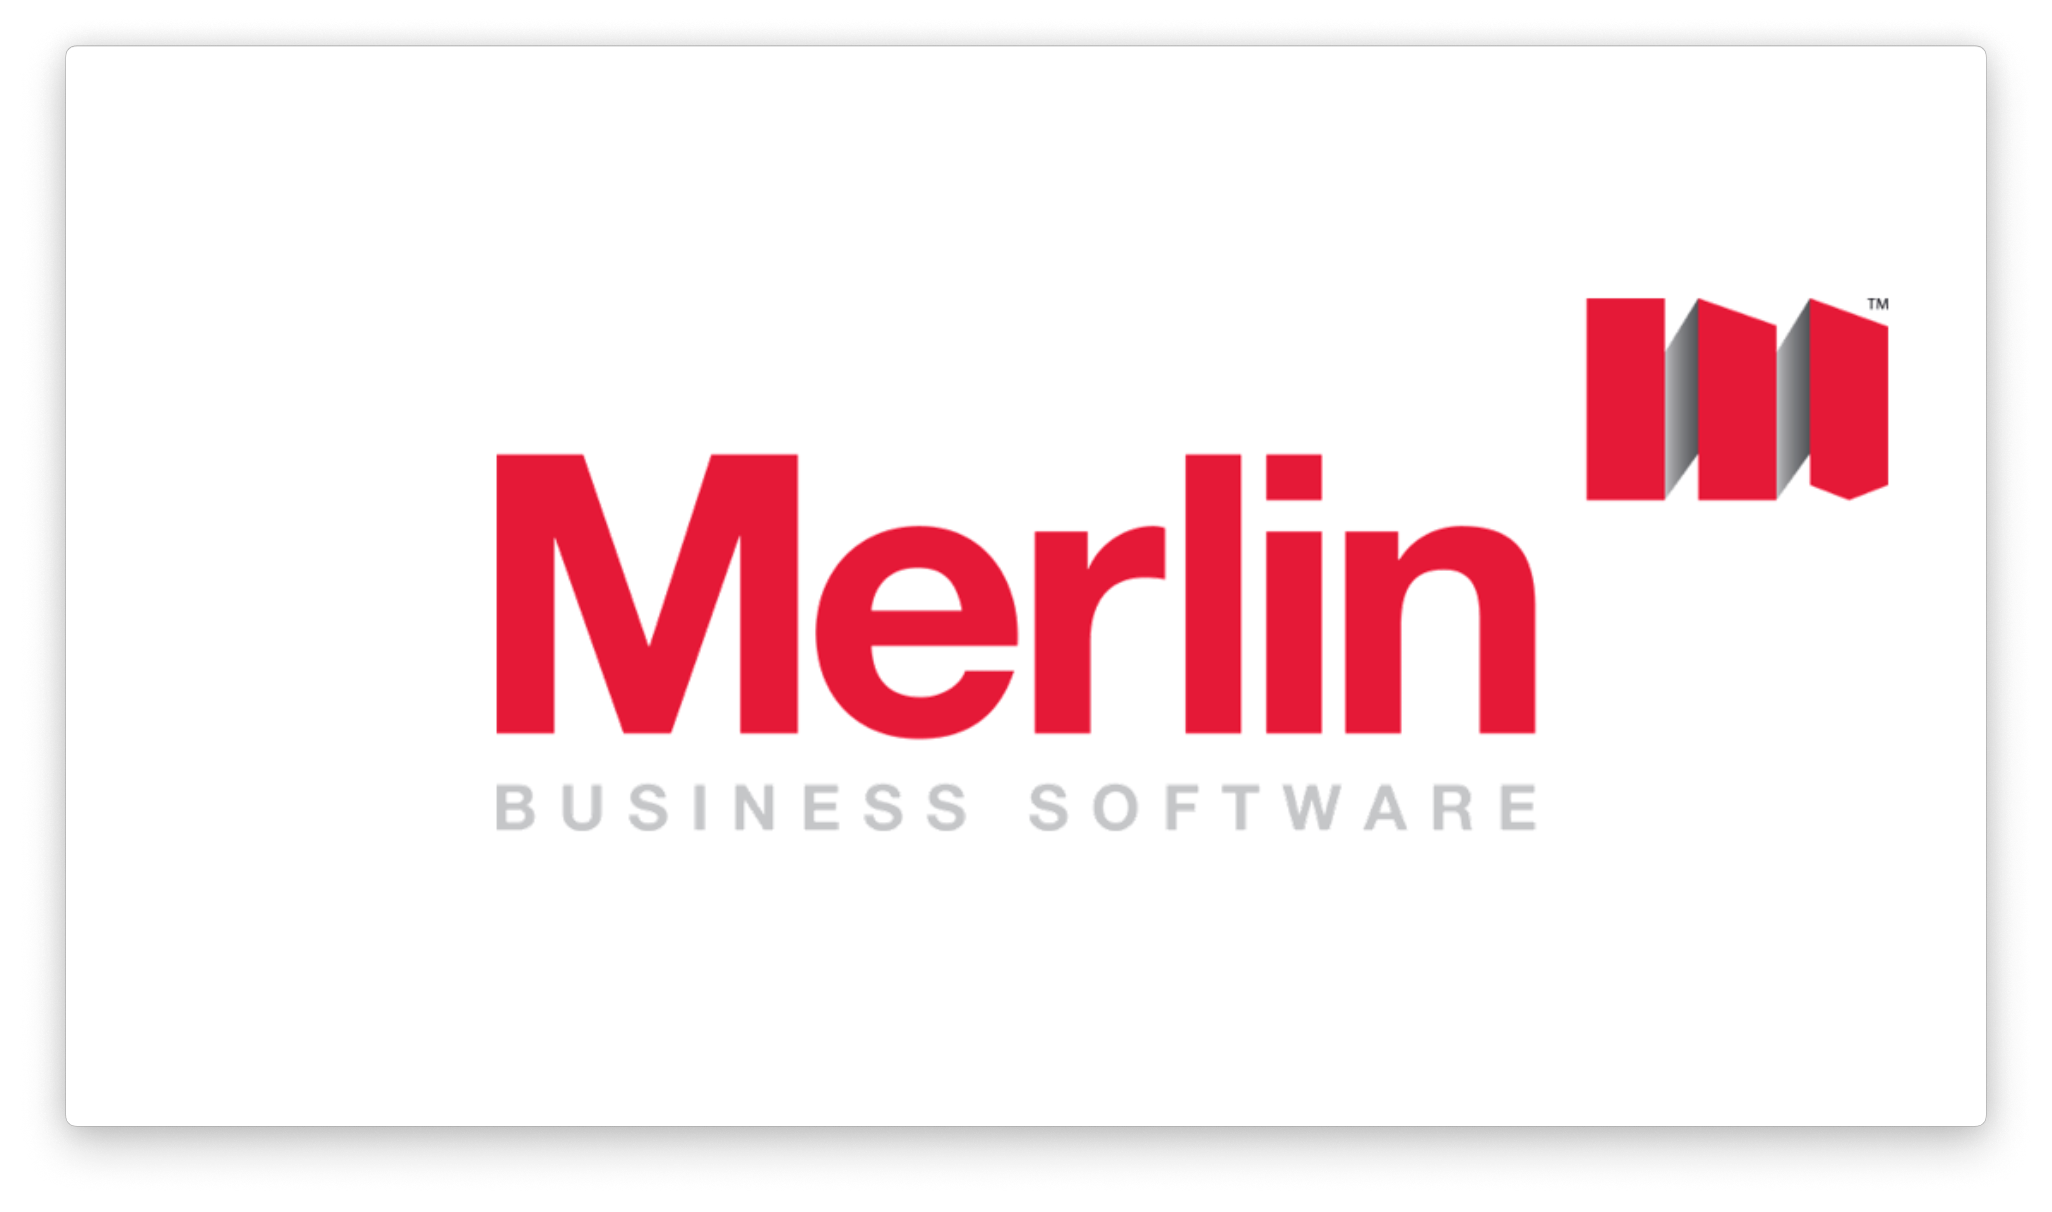 Merlin Business Software logo, following an integration with the client's eCommerce website